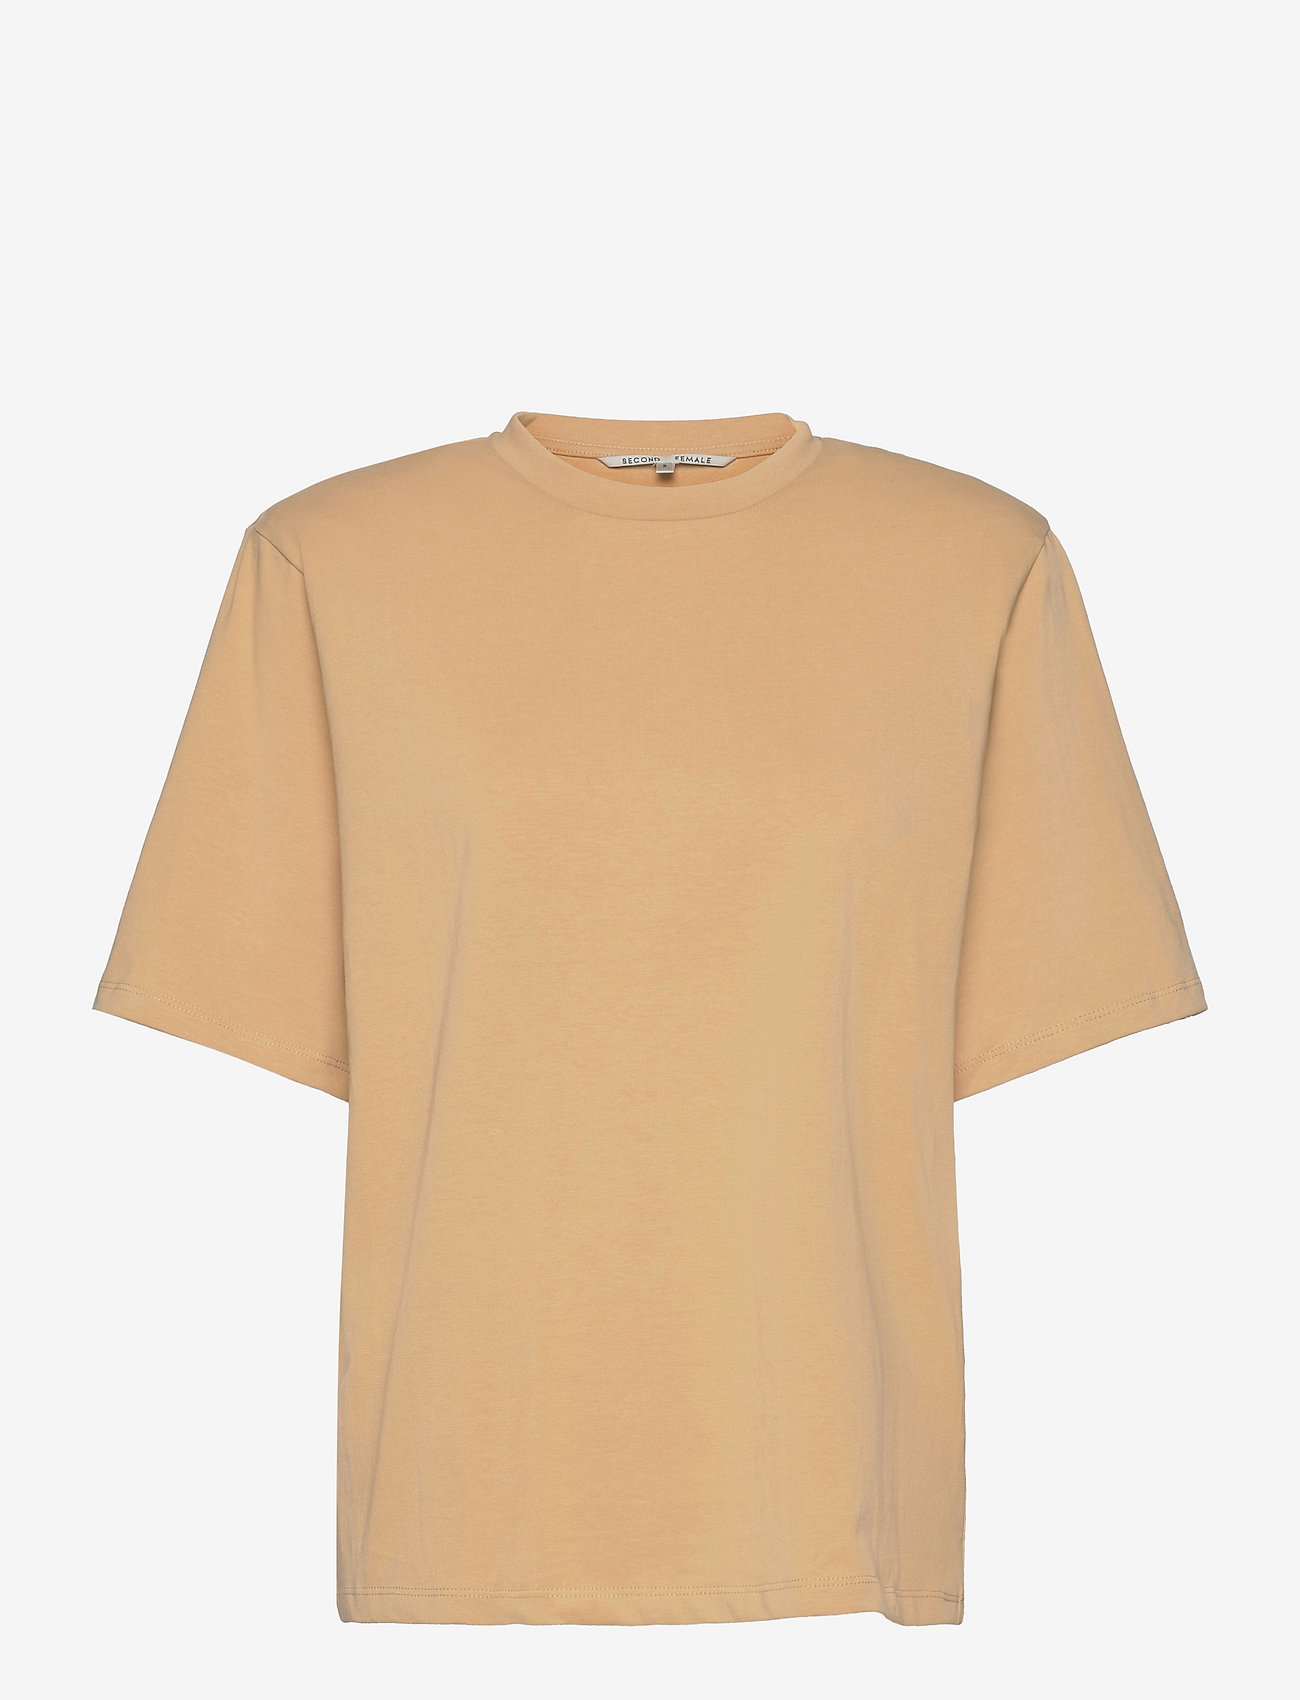 Second Female - Big Paddy Tee - t-shirts - camel - 0